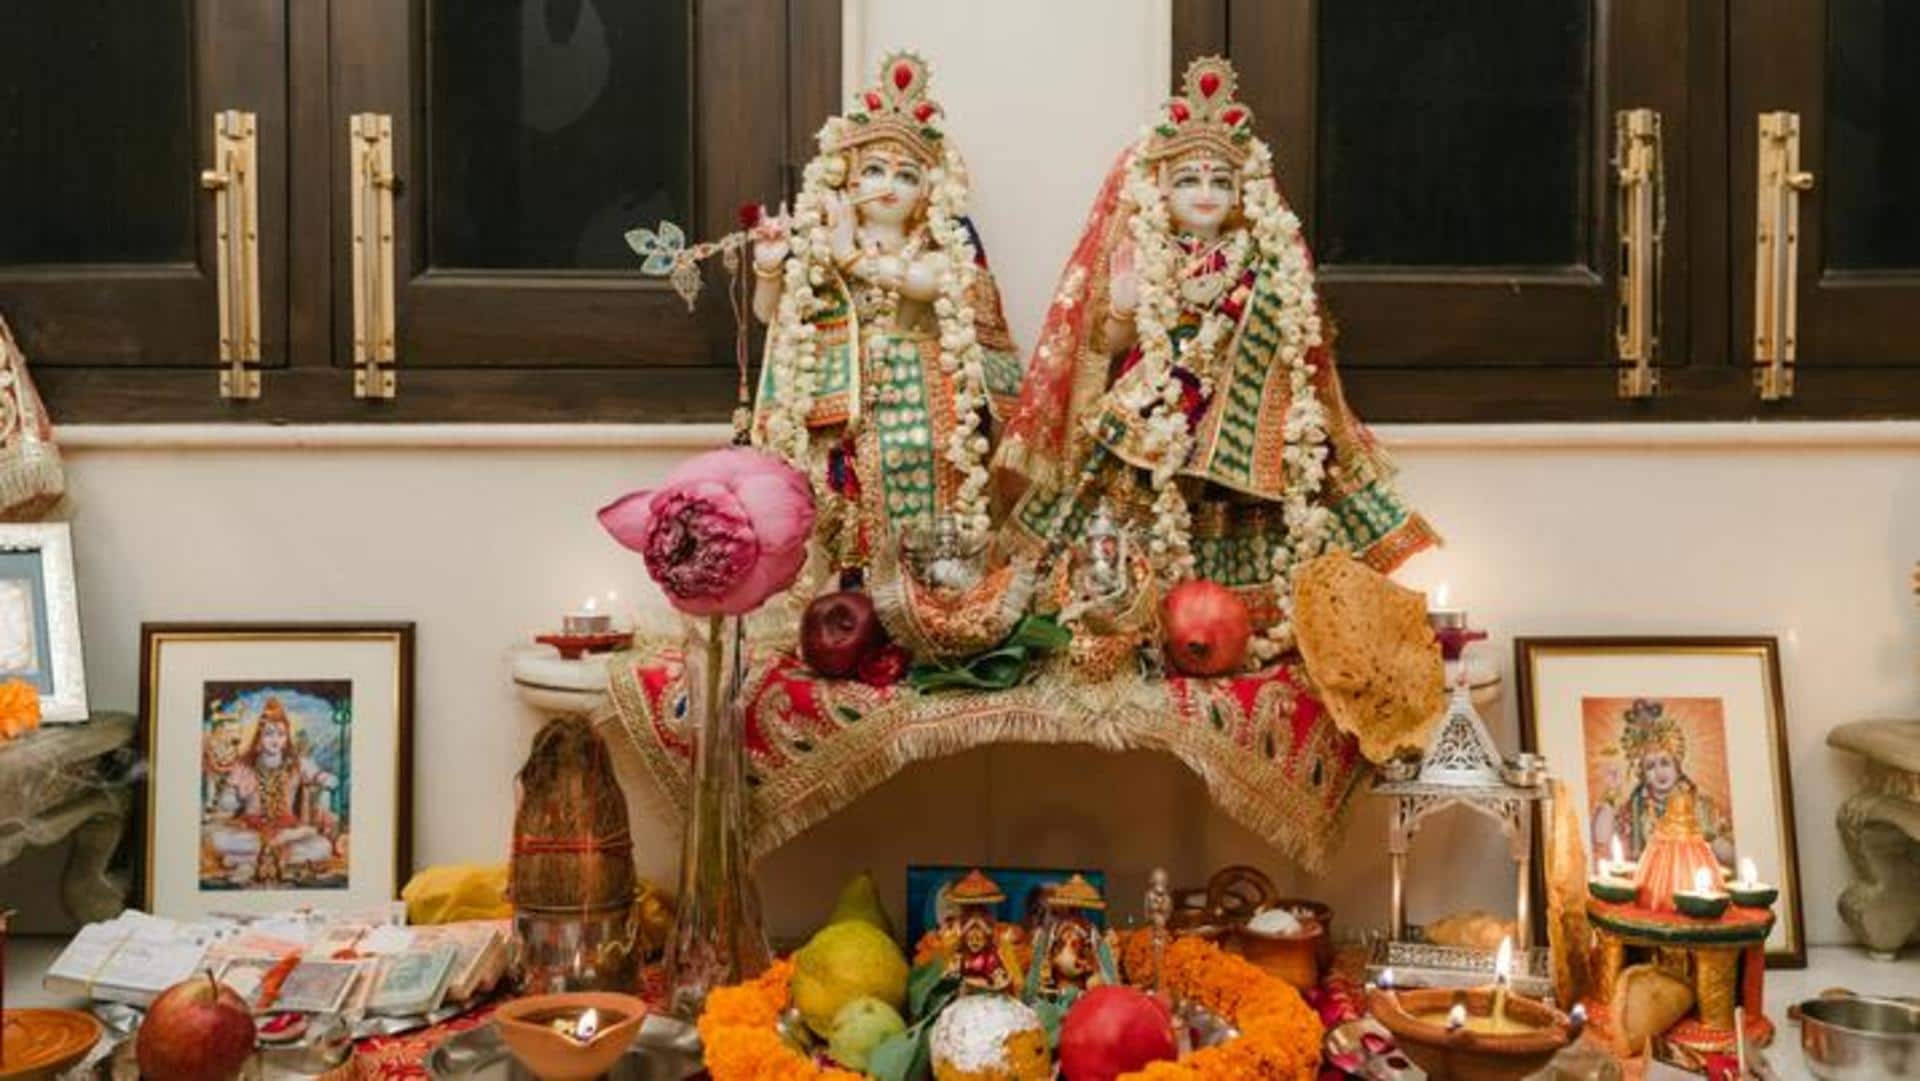 A step-by-step guide to decorating your home temple